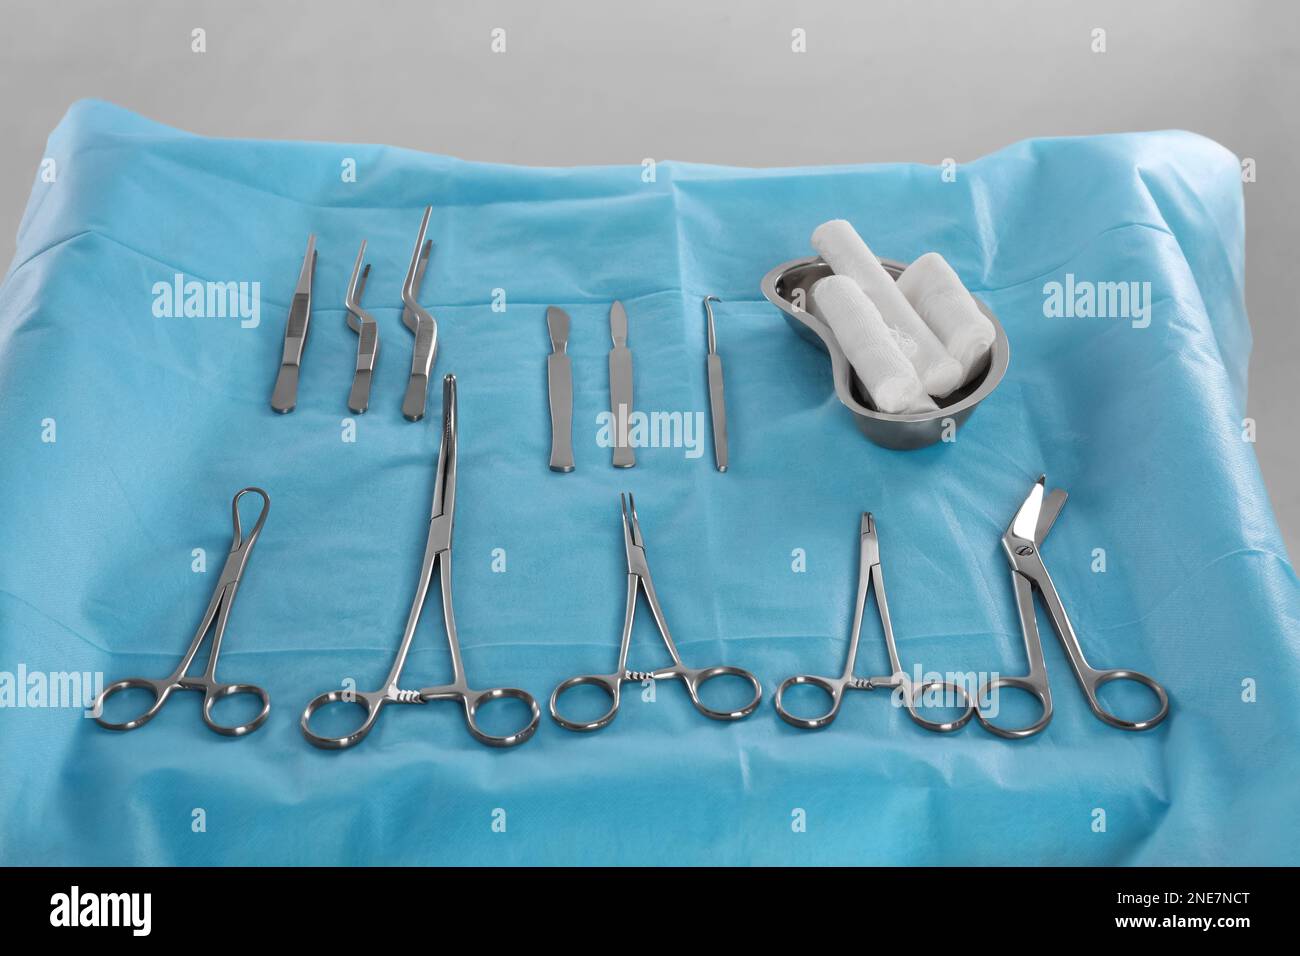 Set of different surgical instruments on table Stock Photo